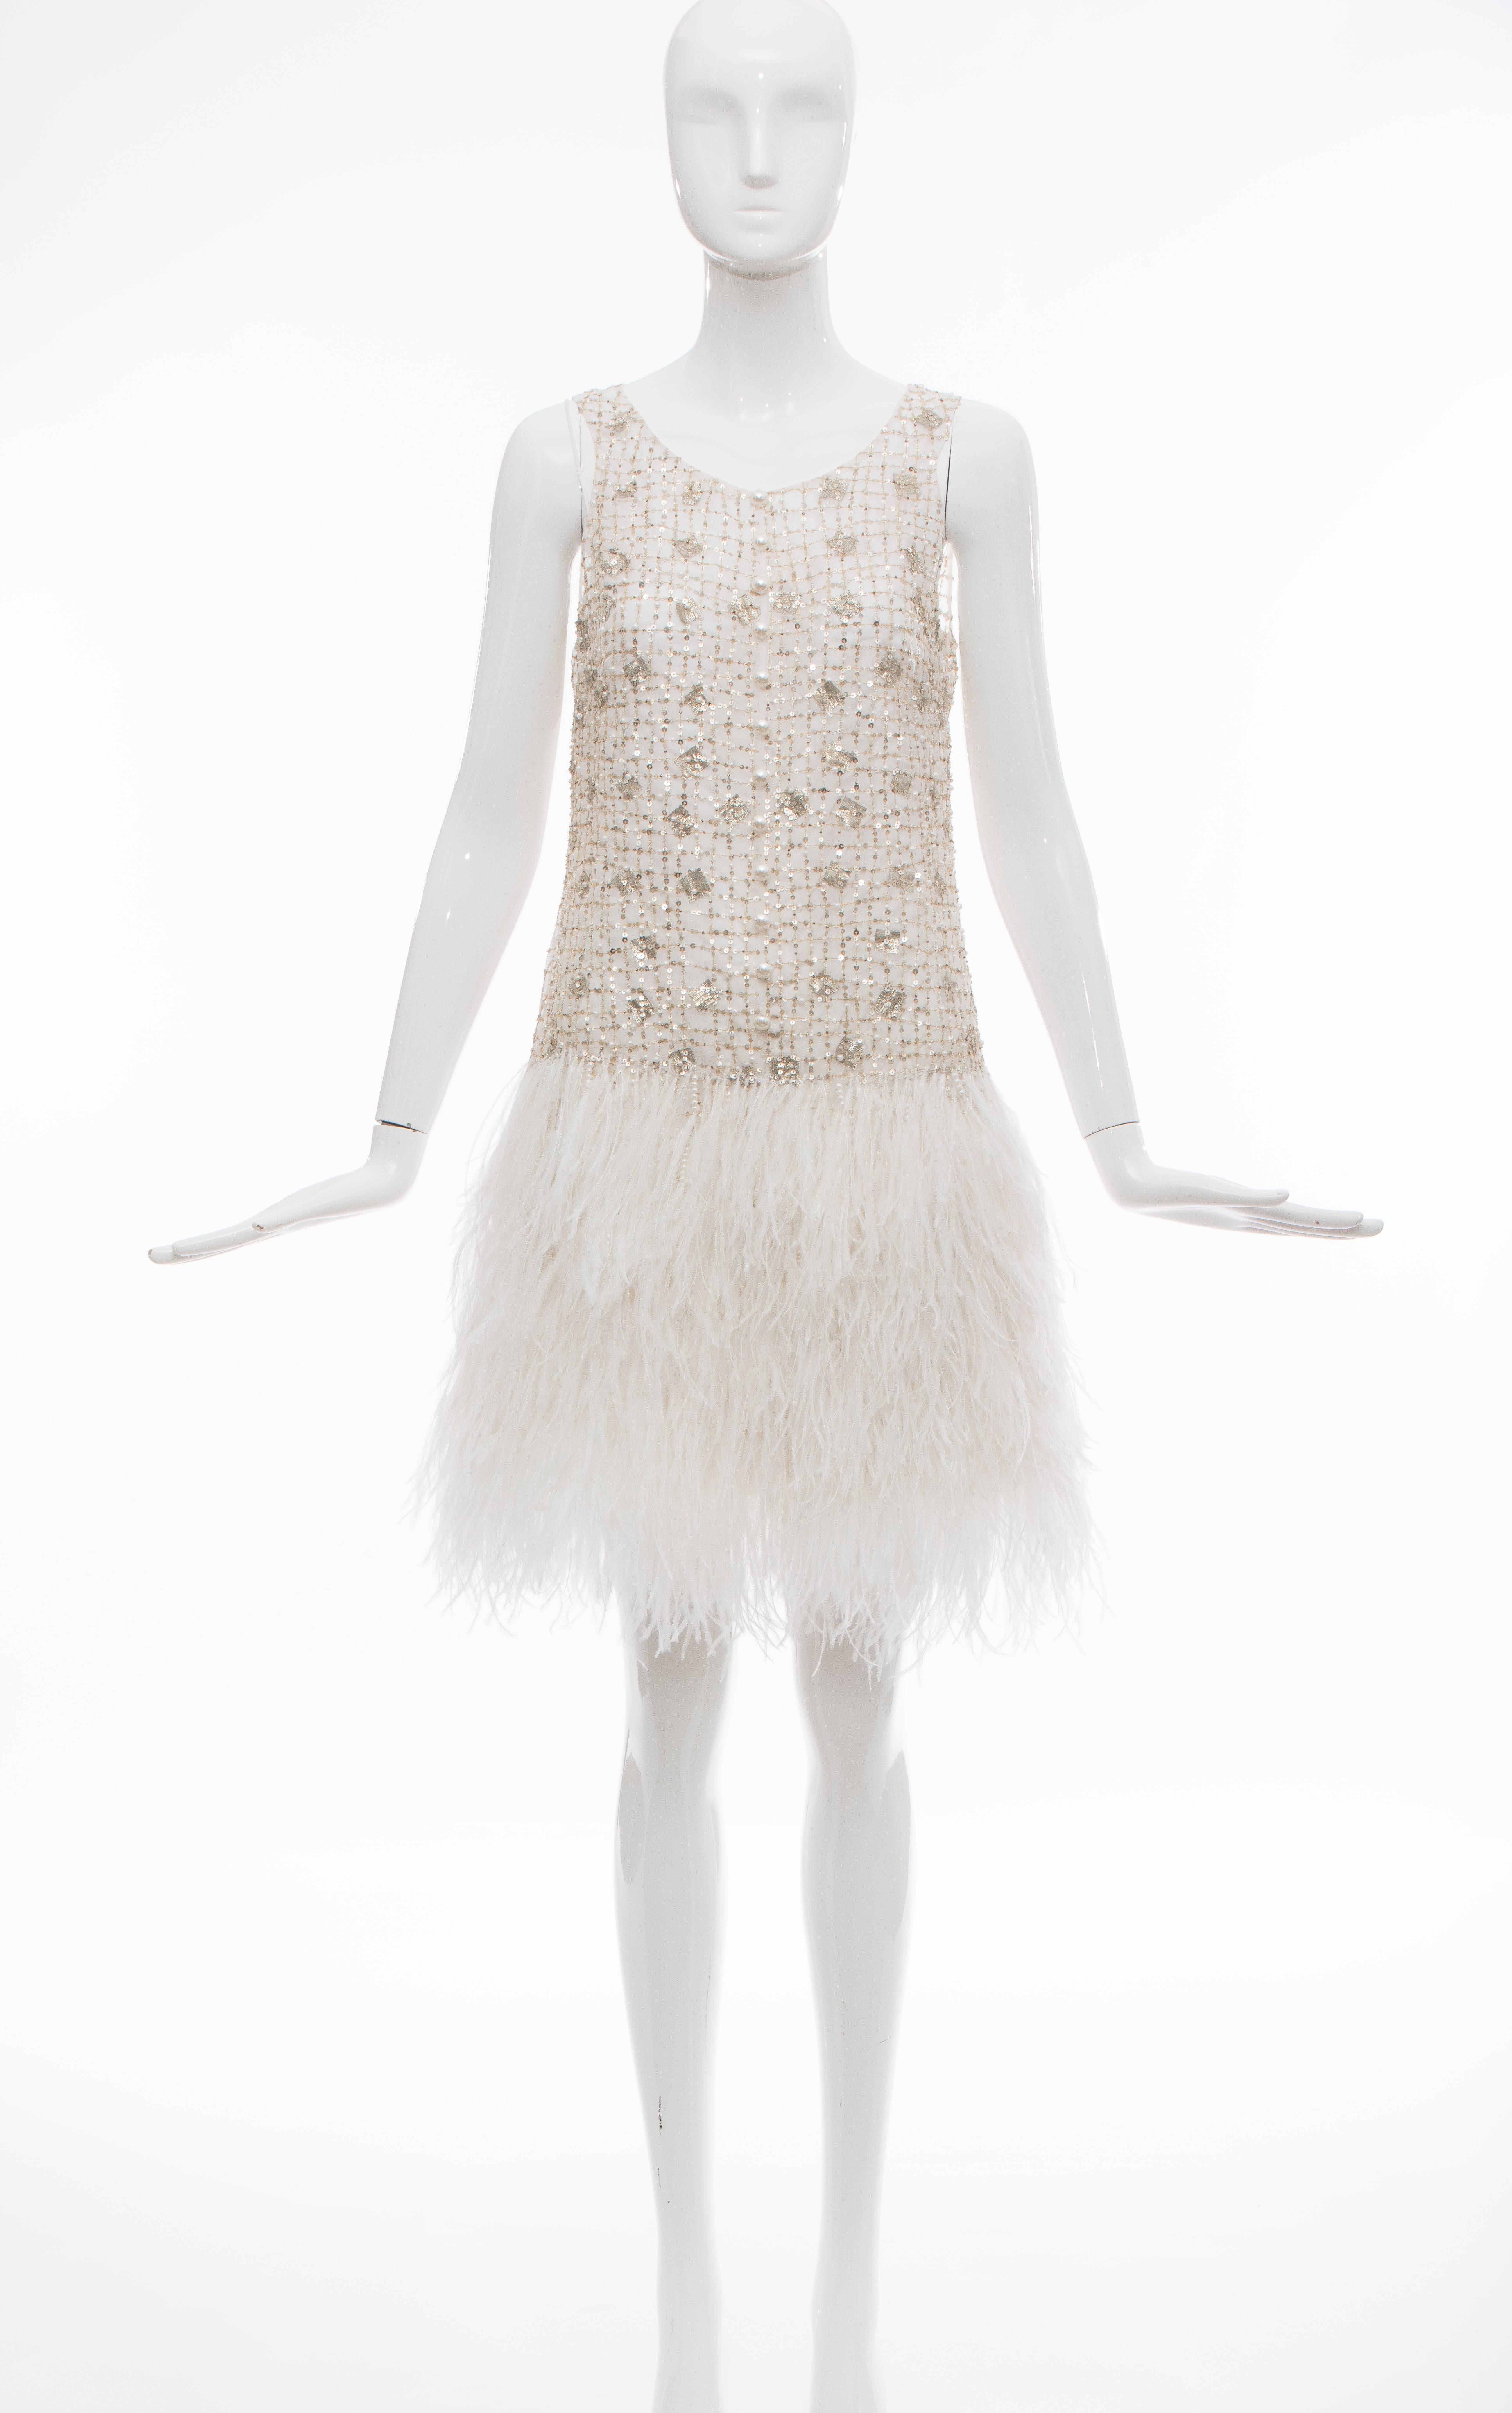 Oscar de la Renta sleeveless evening dress with metallic sequin and pearlescent beaded accents throughout, ostrich feathers at dropped waist skirt, pearlescent button details at center front and key hole at center back featuring button closure.

US.